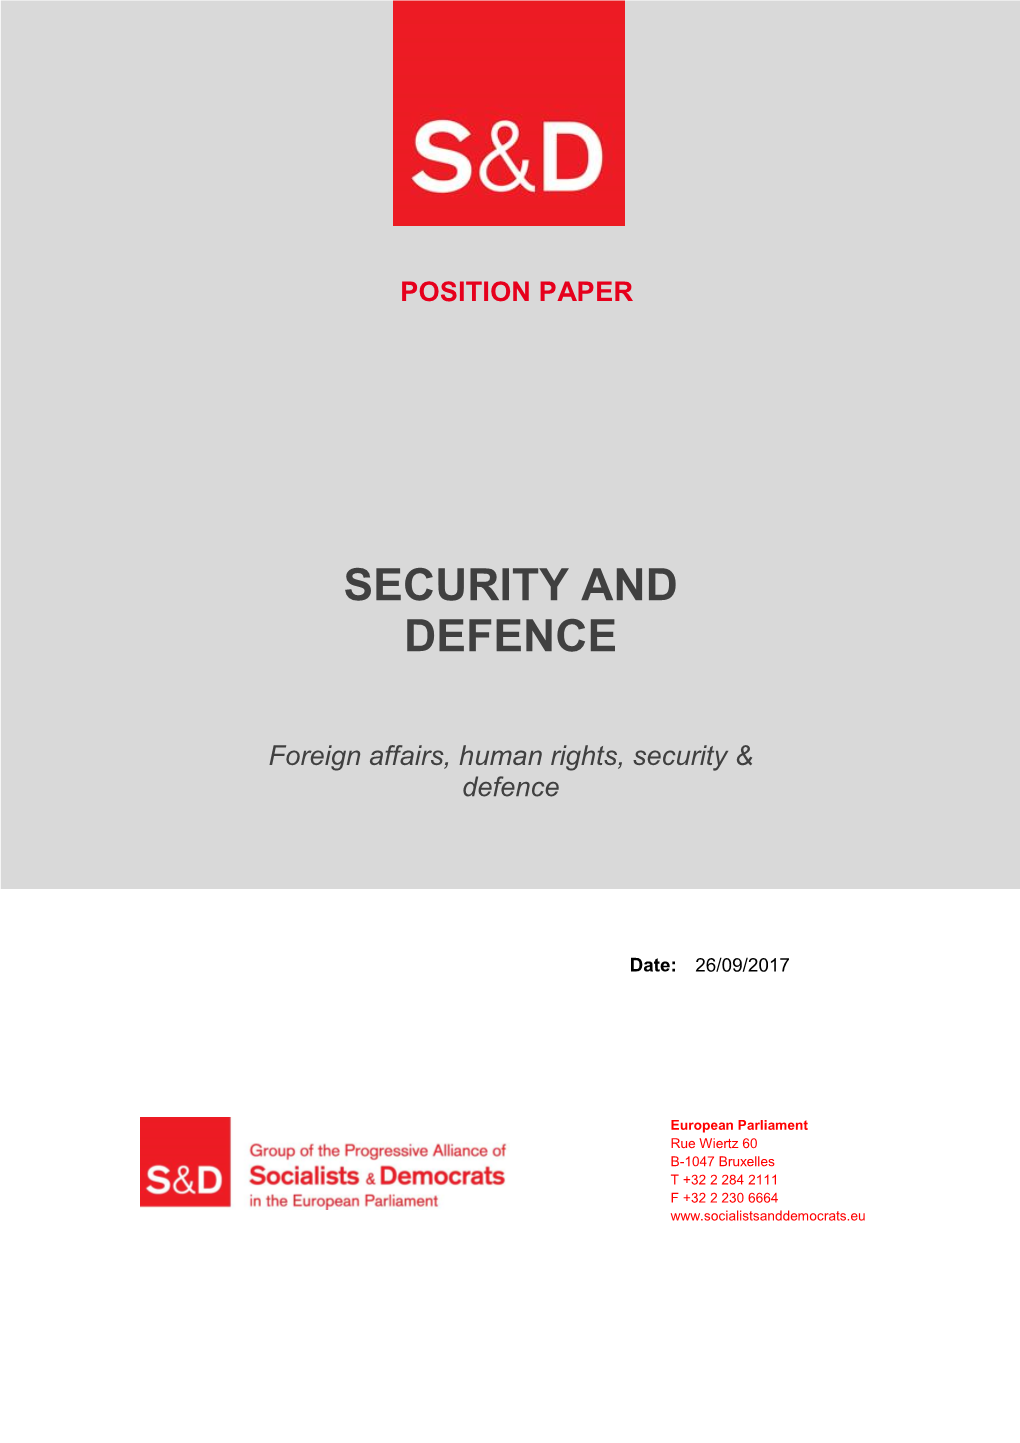 Position Paper: Security and Defence